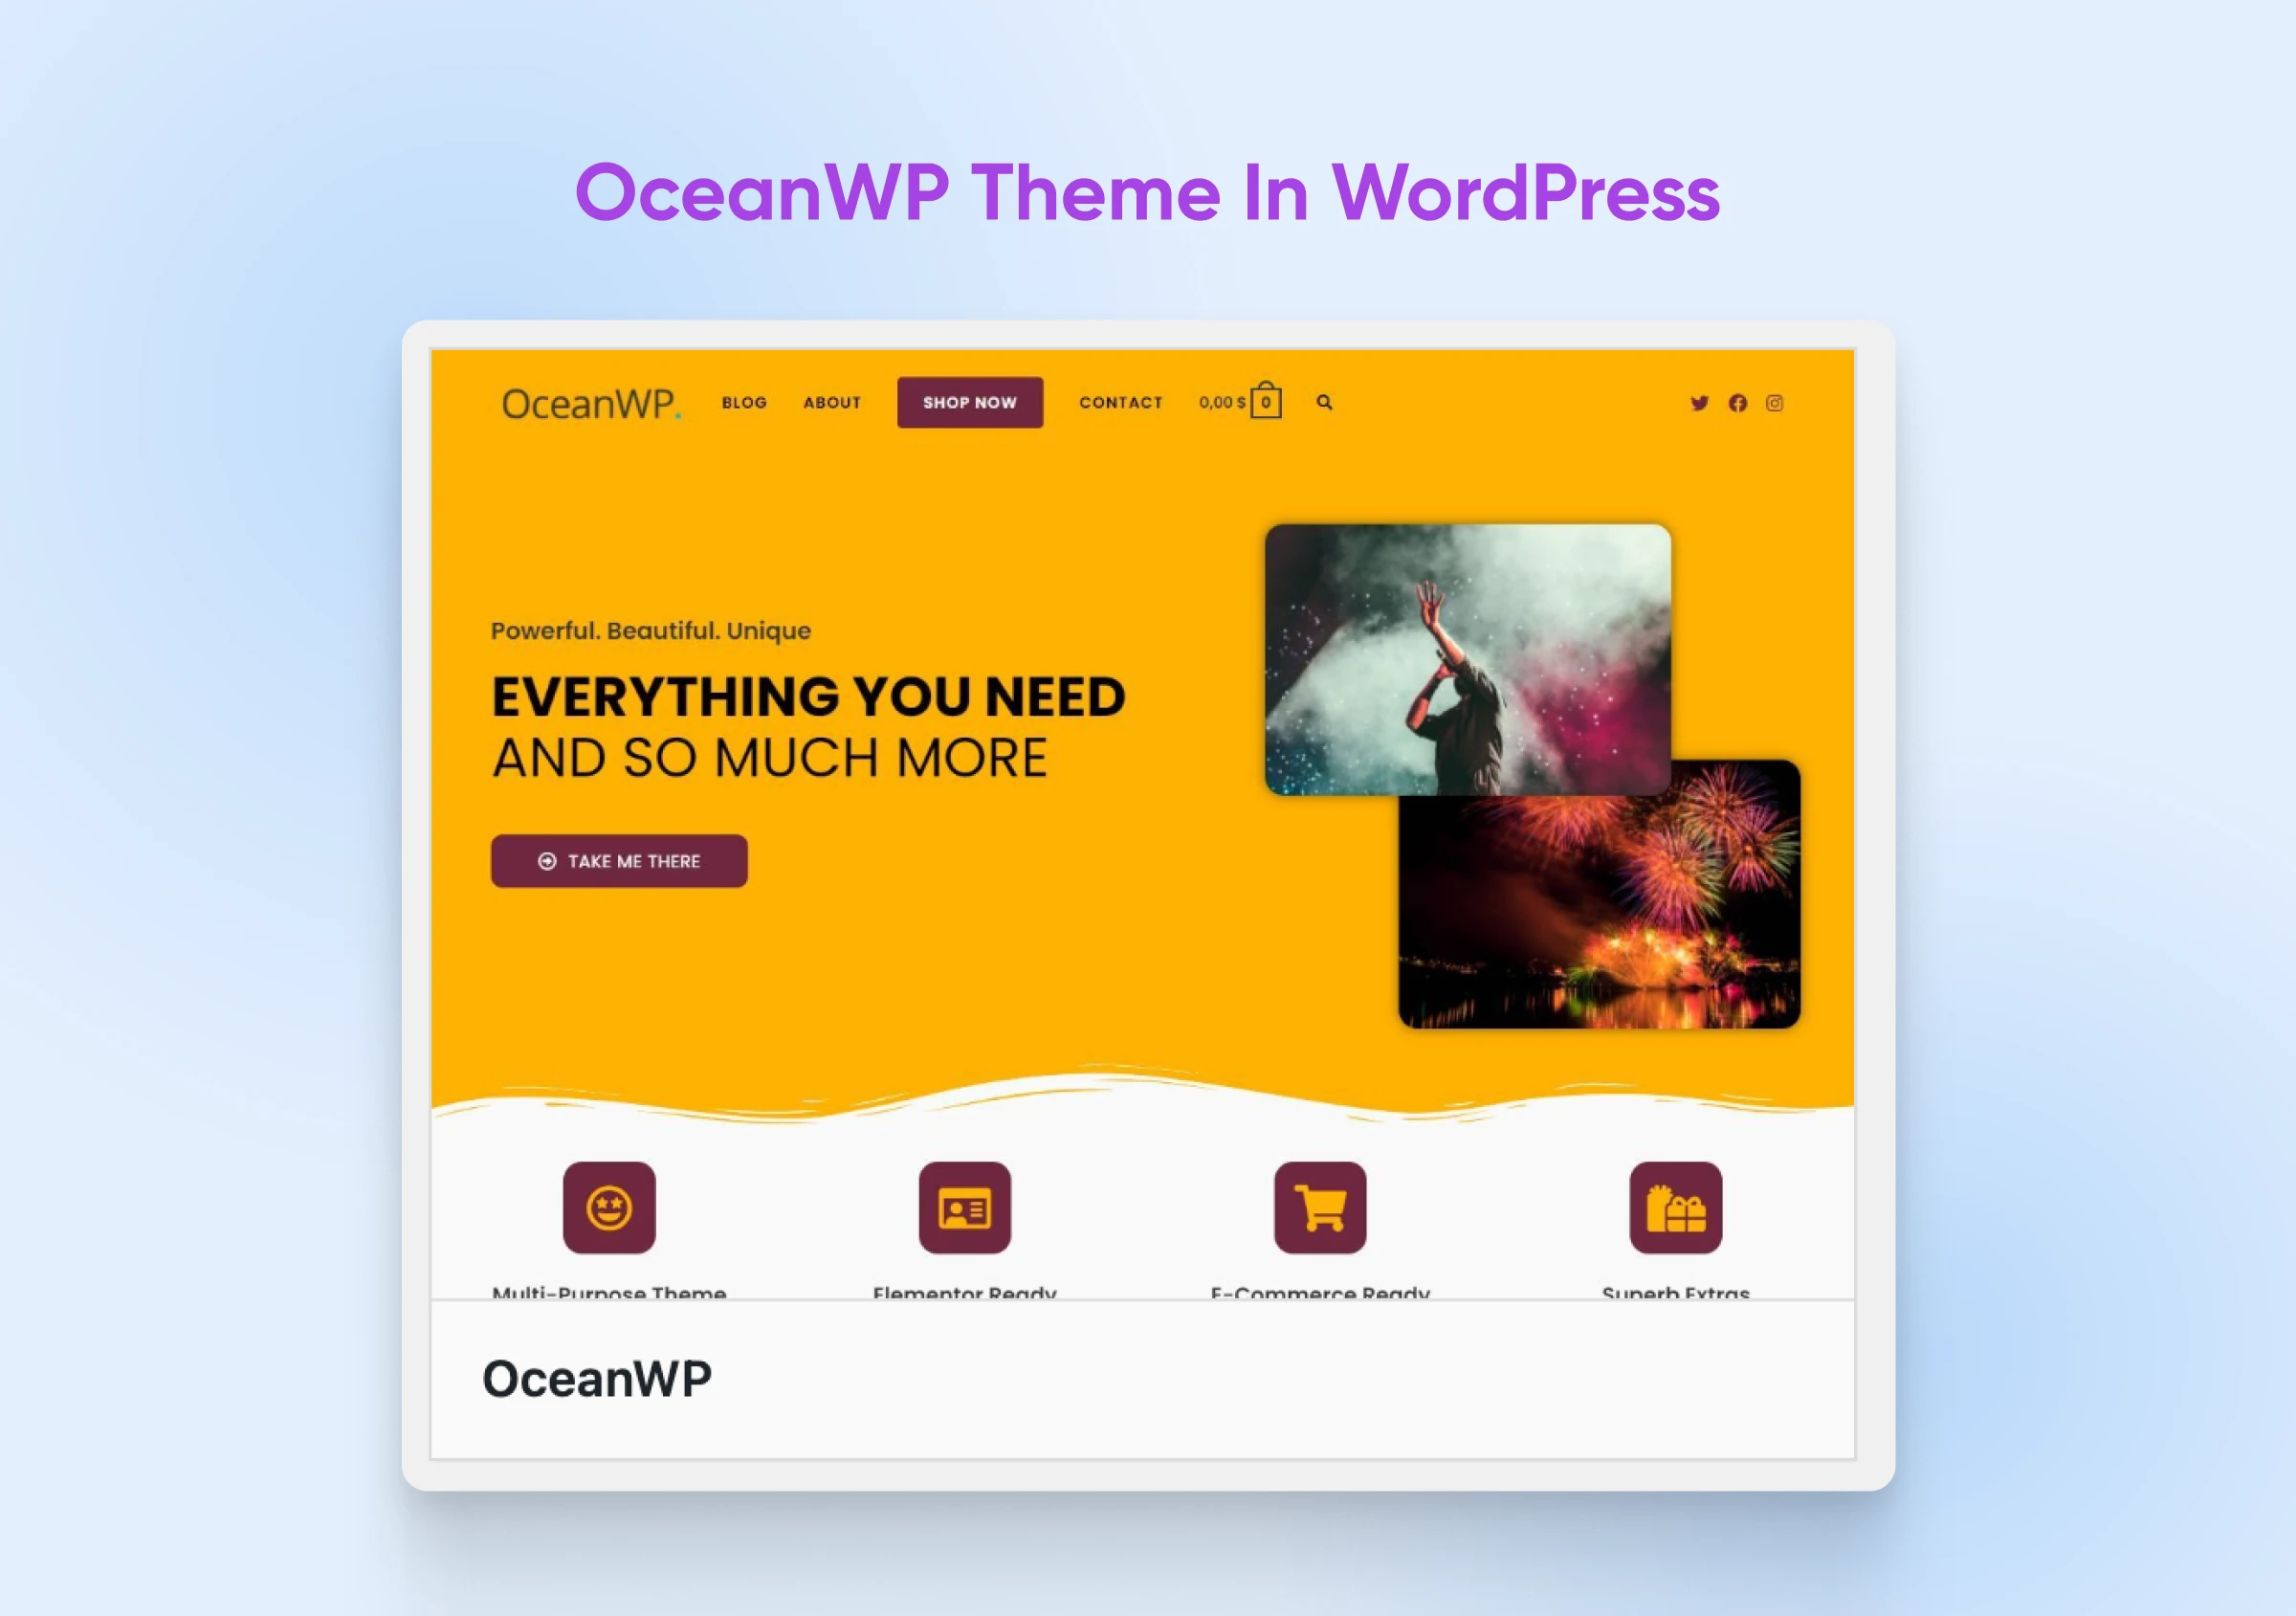 OceanWP's dialog box screenshot with the tagline, "EVERYTHING YOU NEED AND SO MUCH MORE" and a CTA button. 